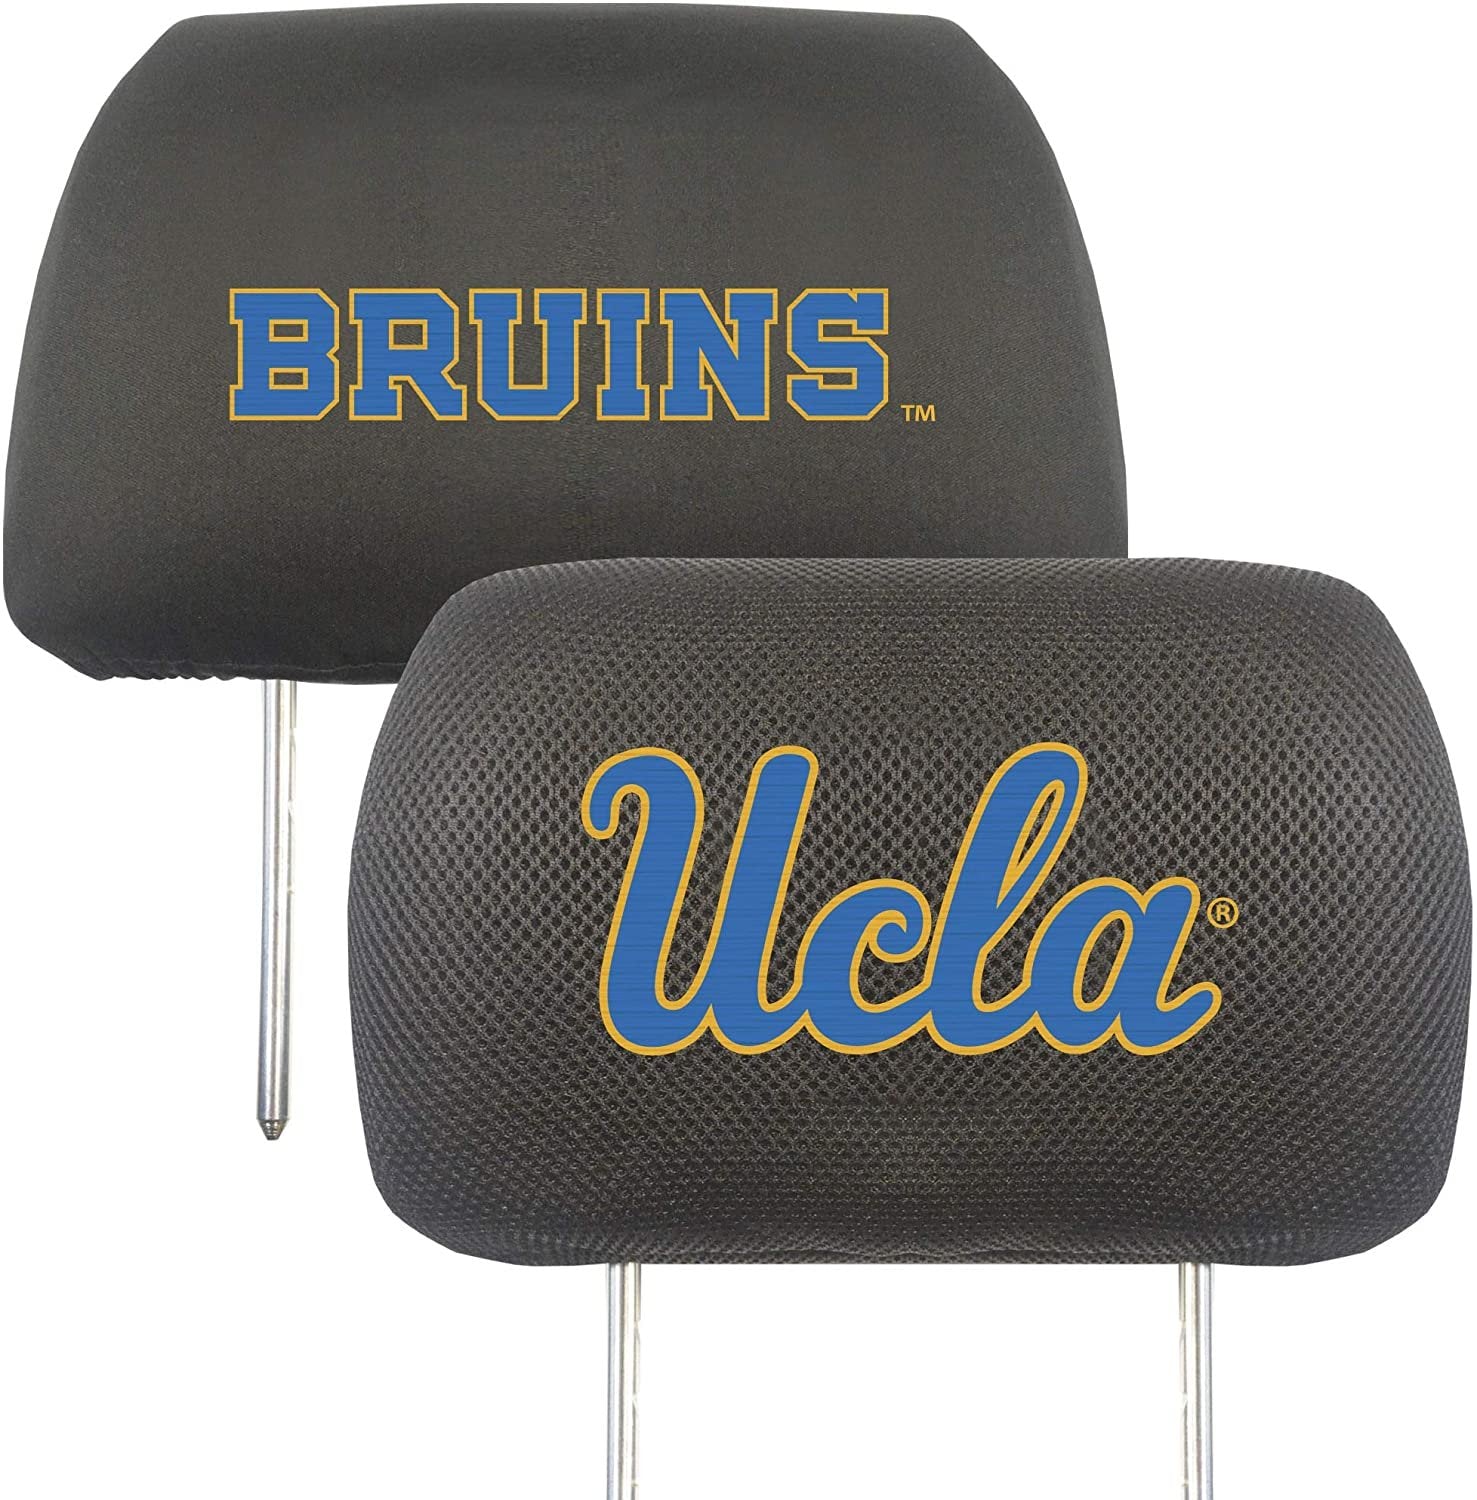 UCLA Bruins Pair of Premium Auto Head Rest Covers, Embroidered, Black Elastic, 14x10 Inch